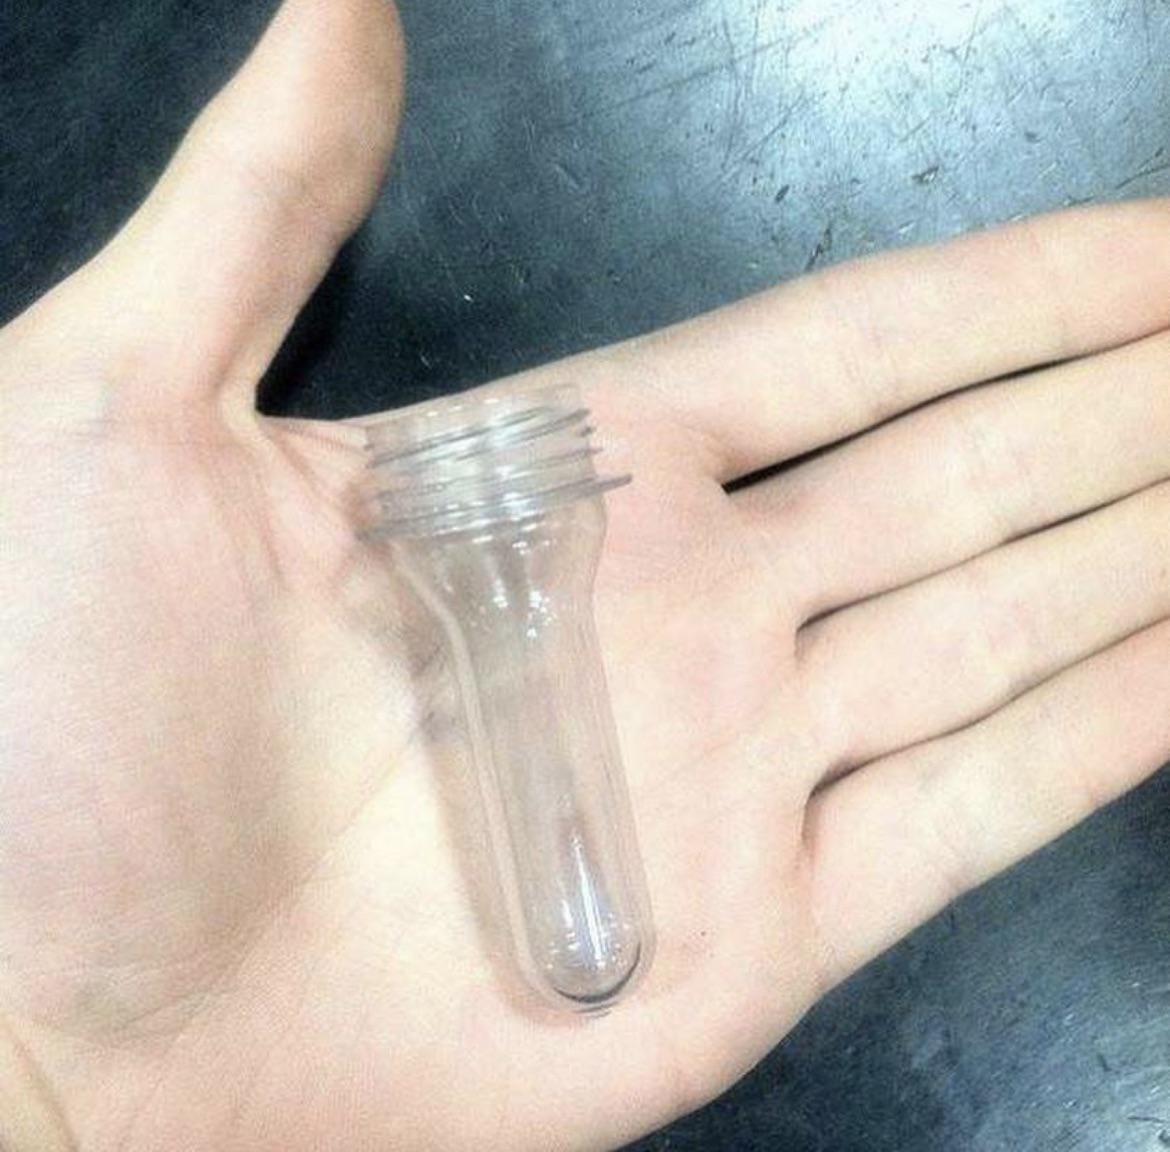 Small tubes in the palm of a hand